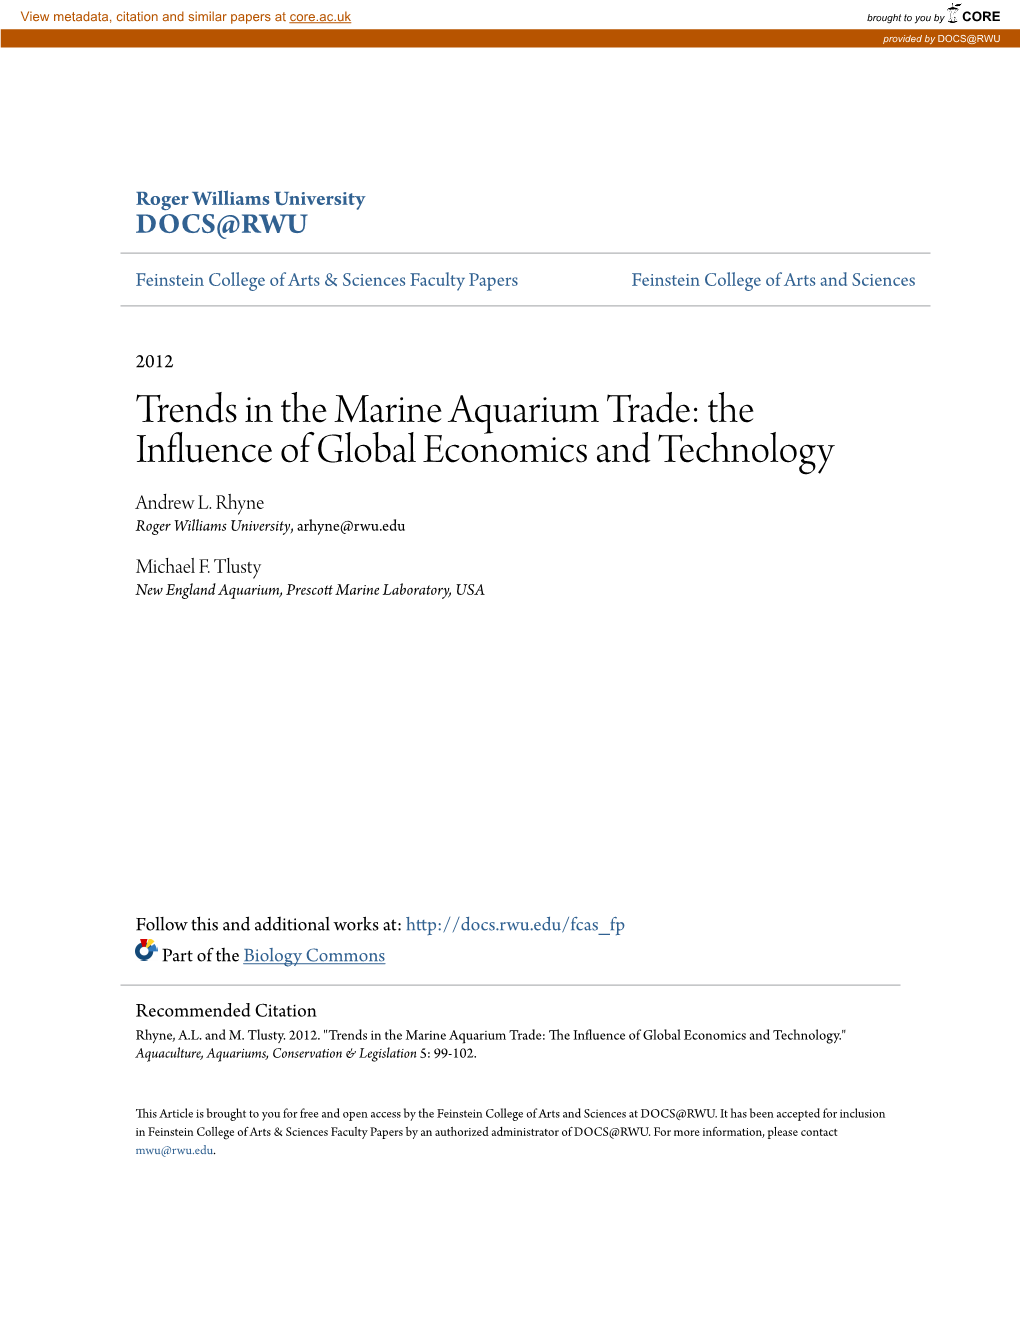 Trends in the Marine Aquarium Trade: the Influence of Global Economics and Technology Andrew L